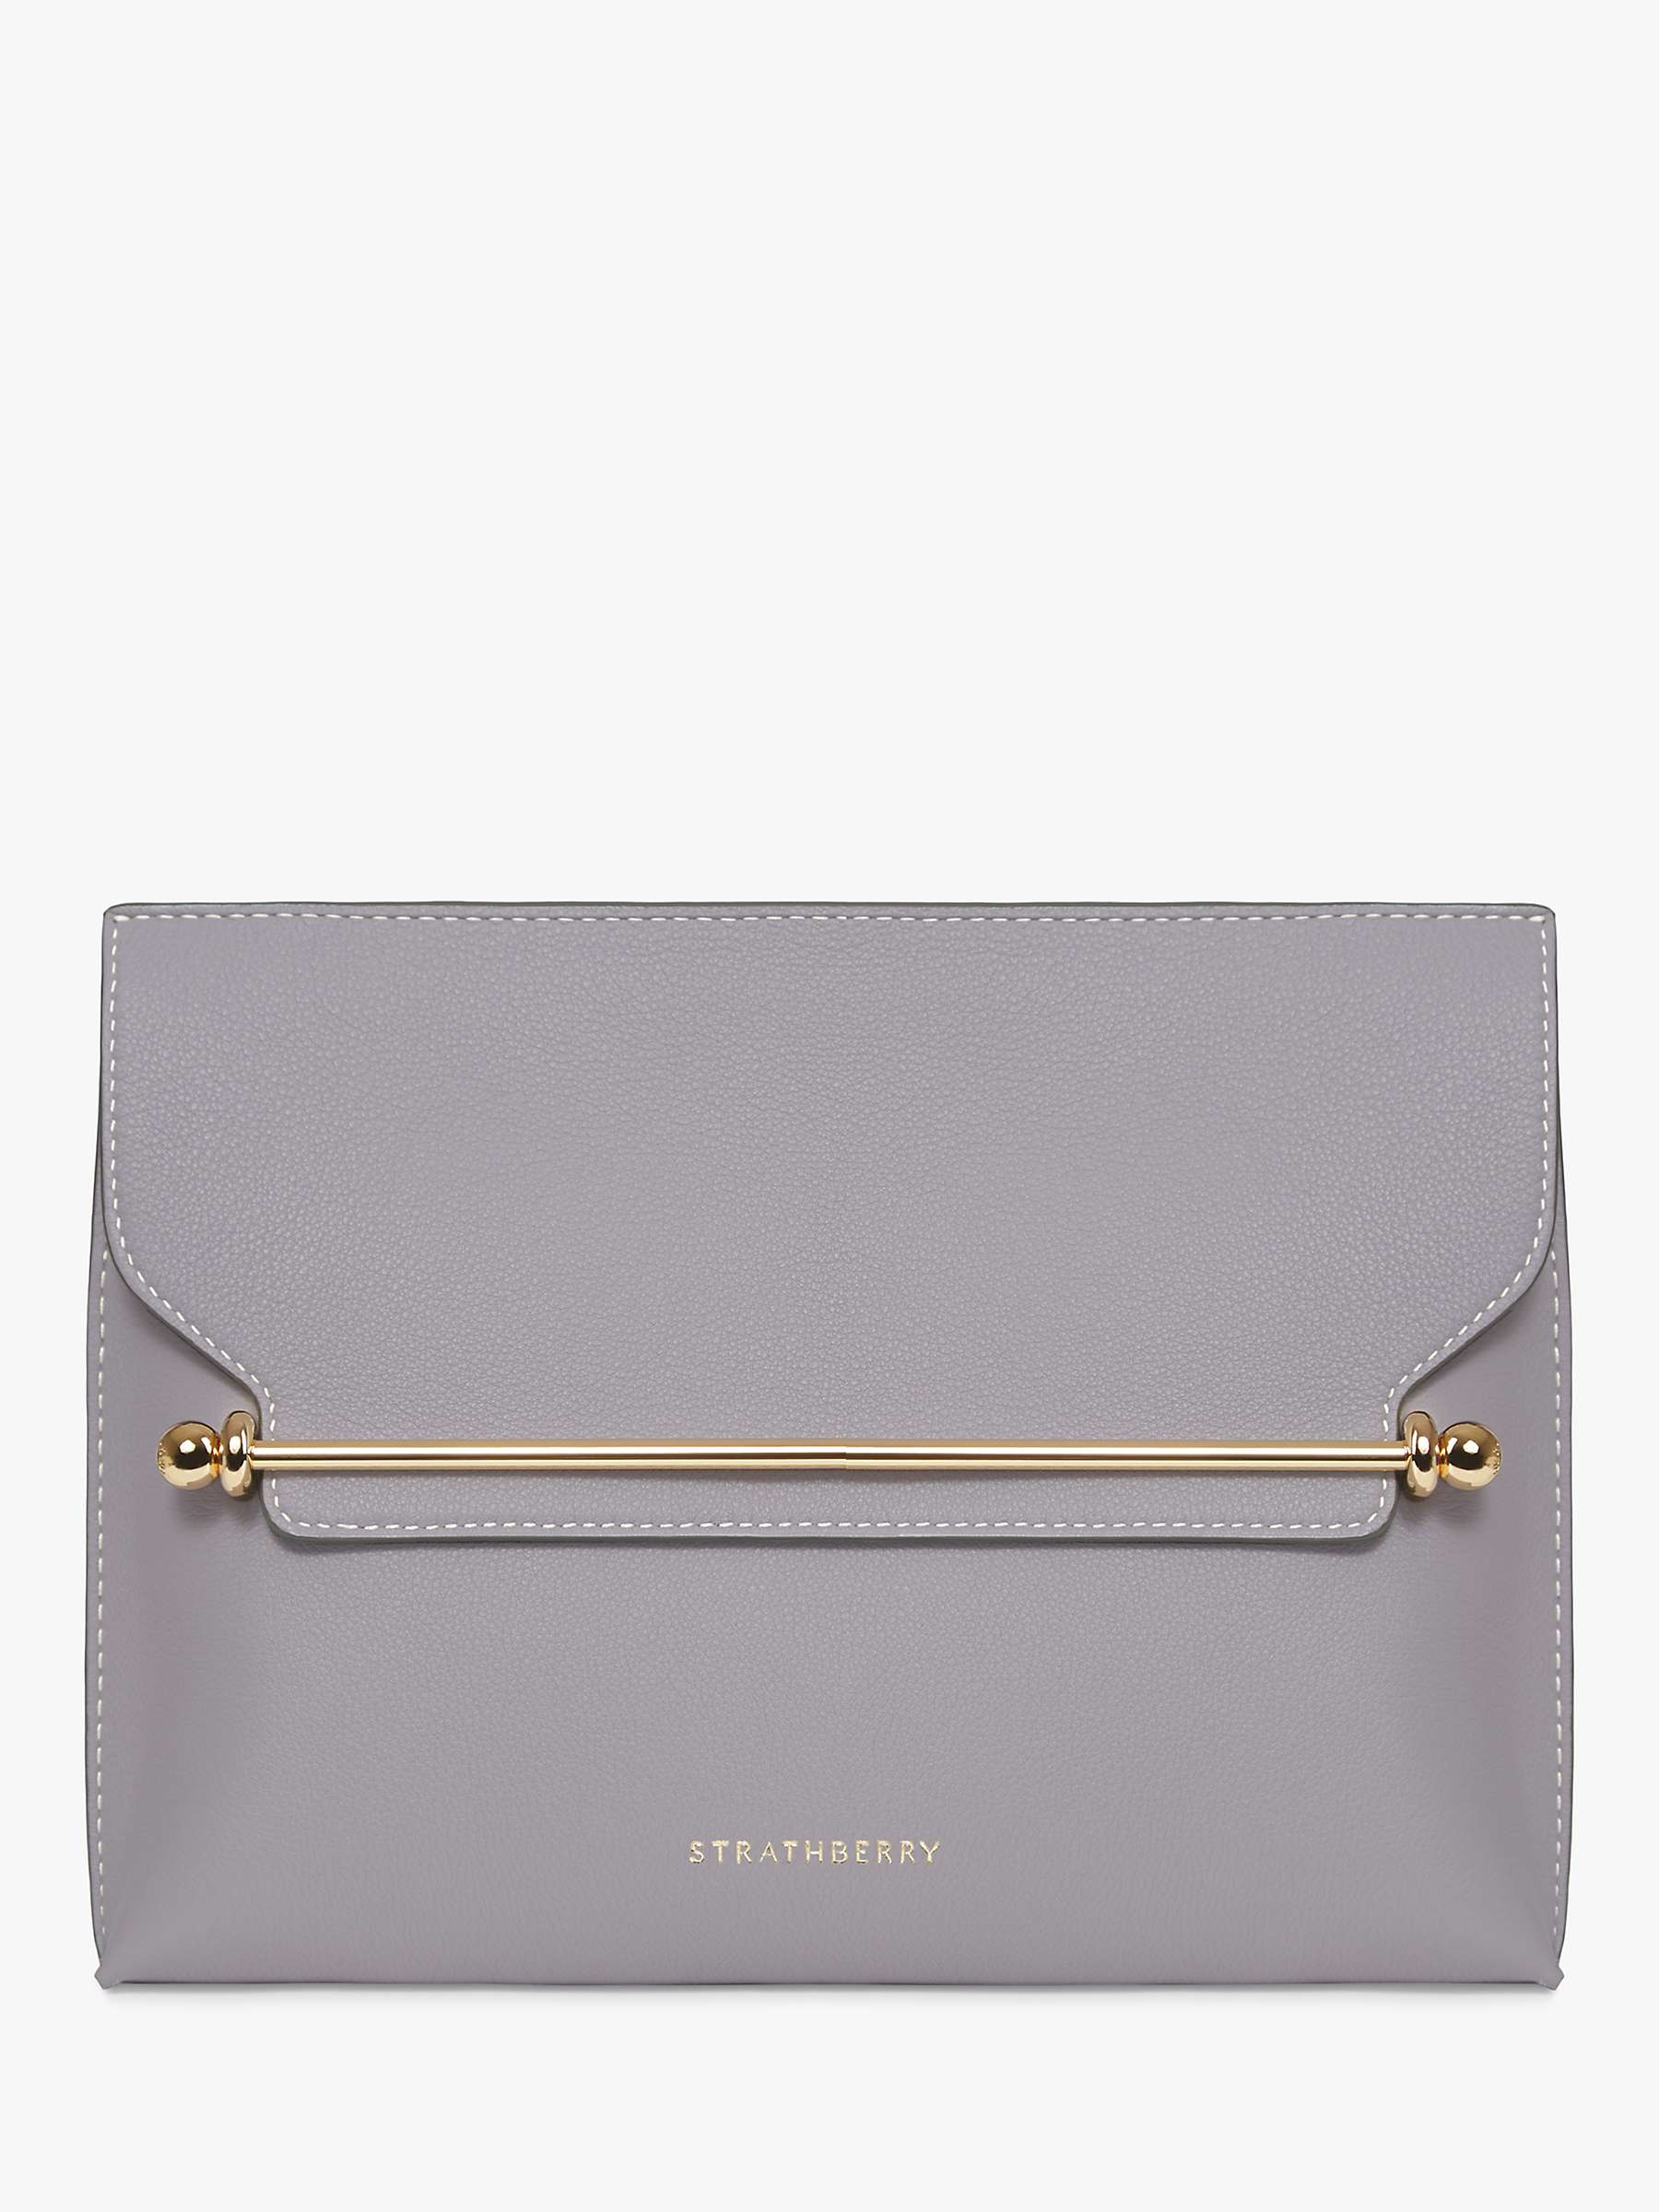 Strathberry Stylist Leather Clutch Bag, Frost Grey/Vanilla at John ...